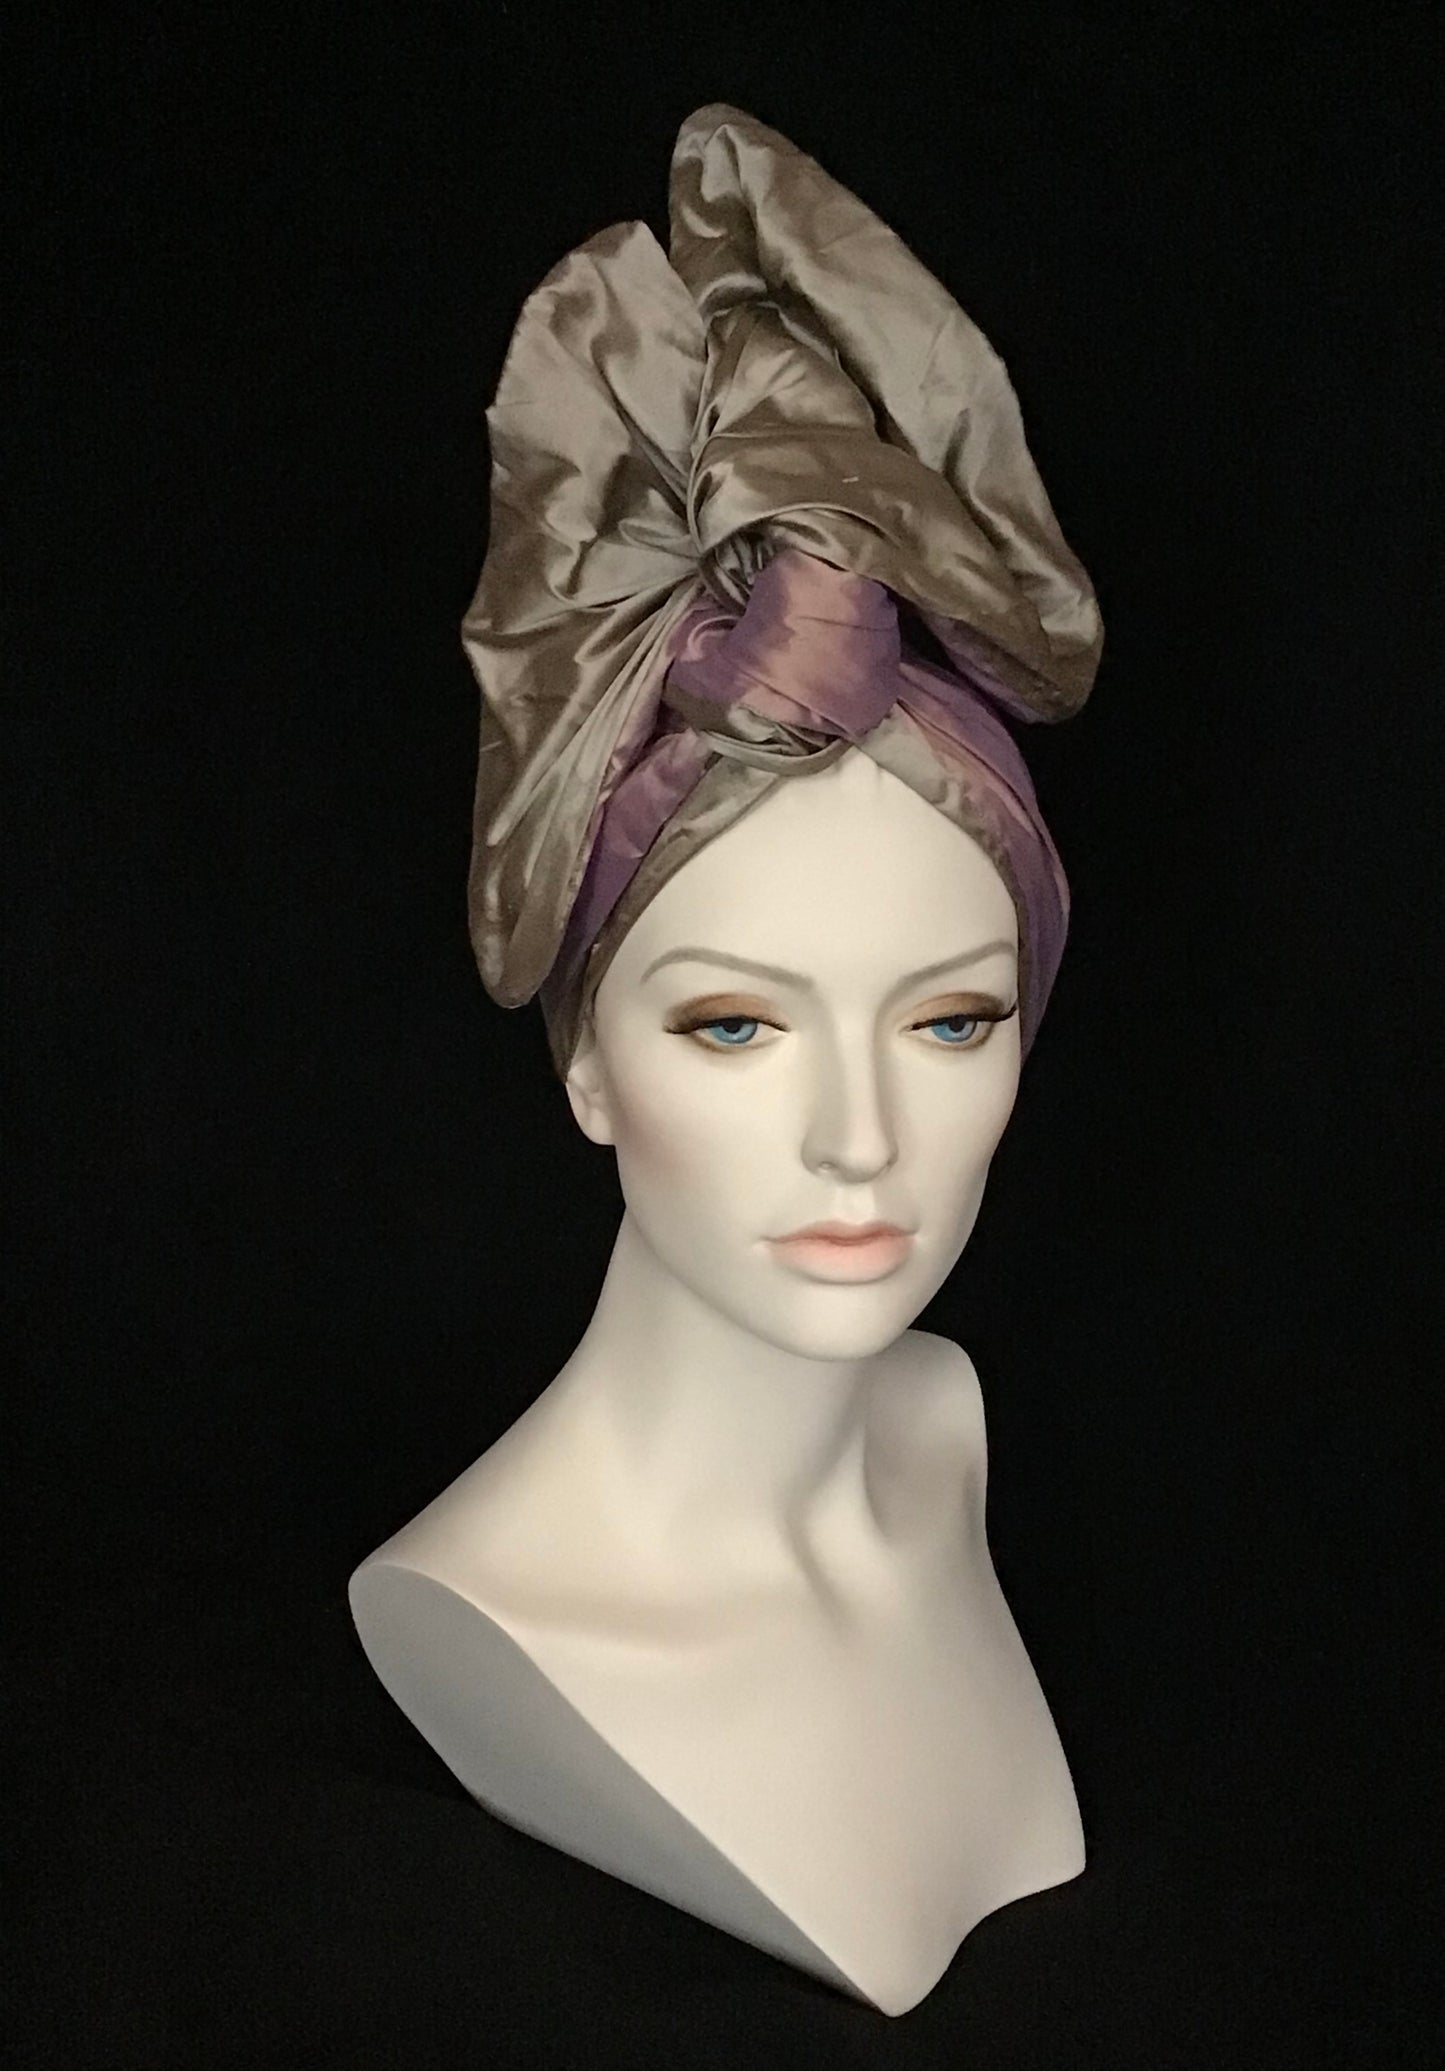 Silk Shantung in two tones Rose #105 and taupe #108